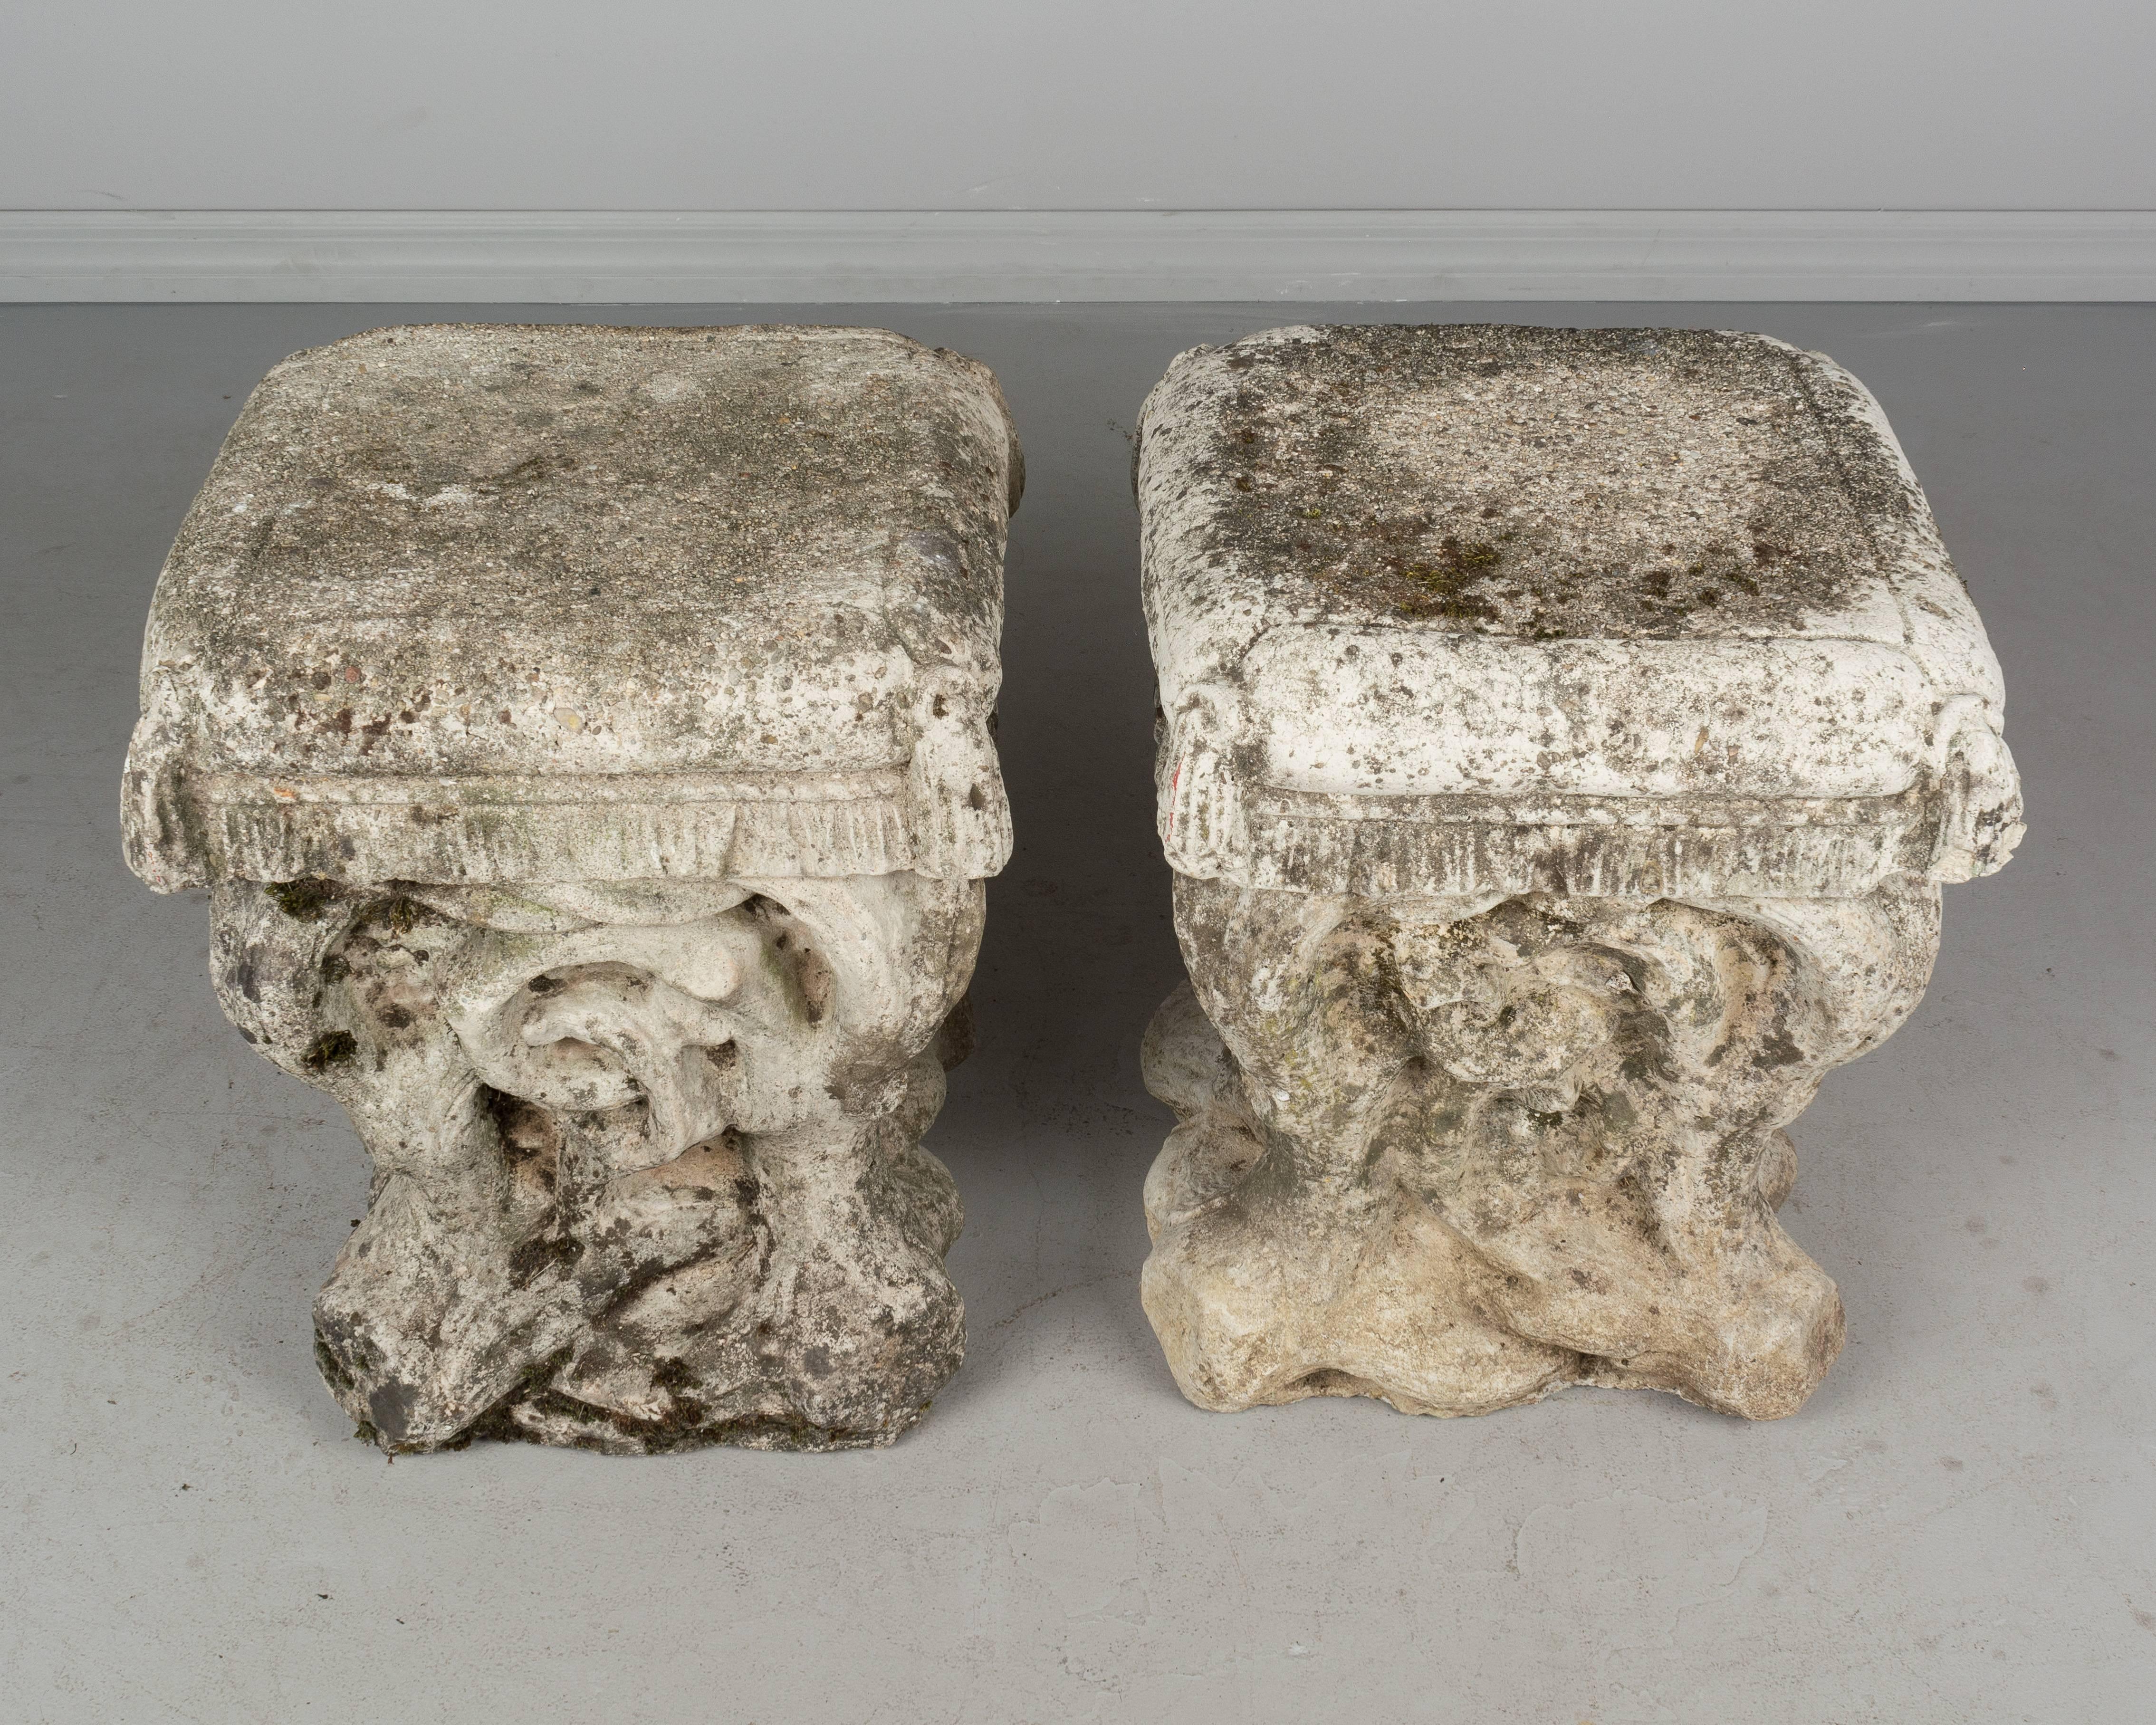 A pair of French cast stone garden stools. Organic forms of twisted vines topped with fringed and tasselled seat cushions. Old mossy patina. About 100 Lbs each. Most garden sculptures are stored outside where it continues to acquire additional